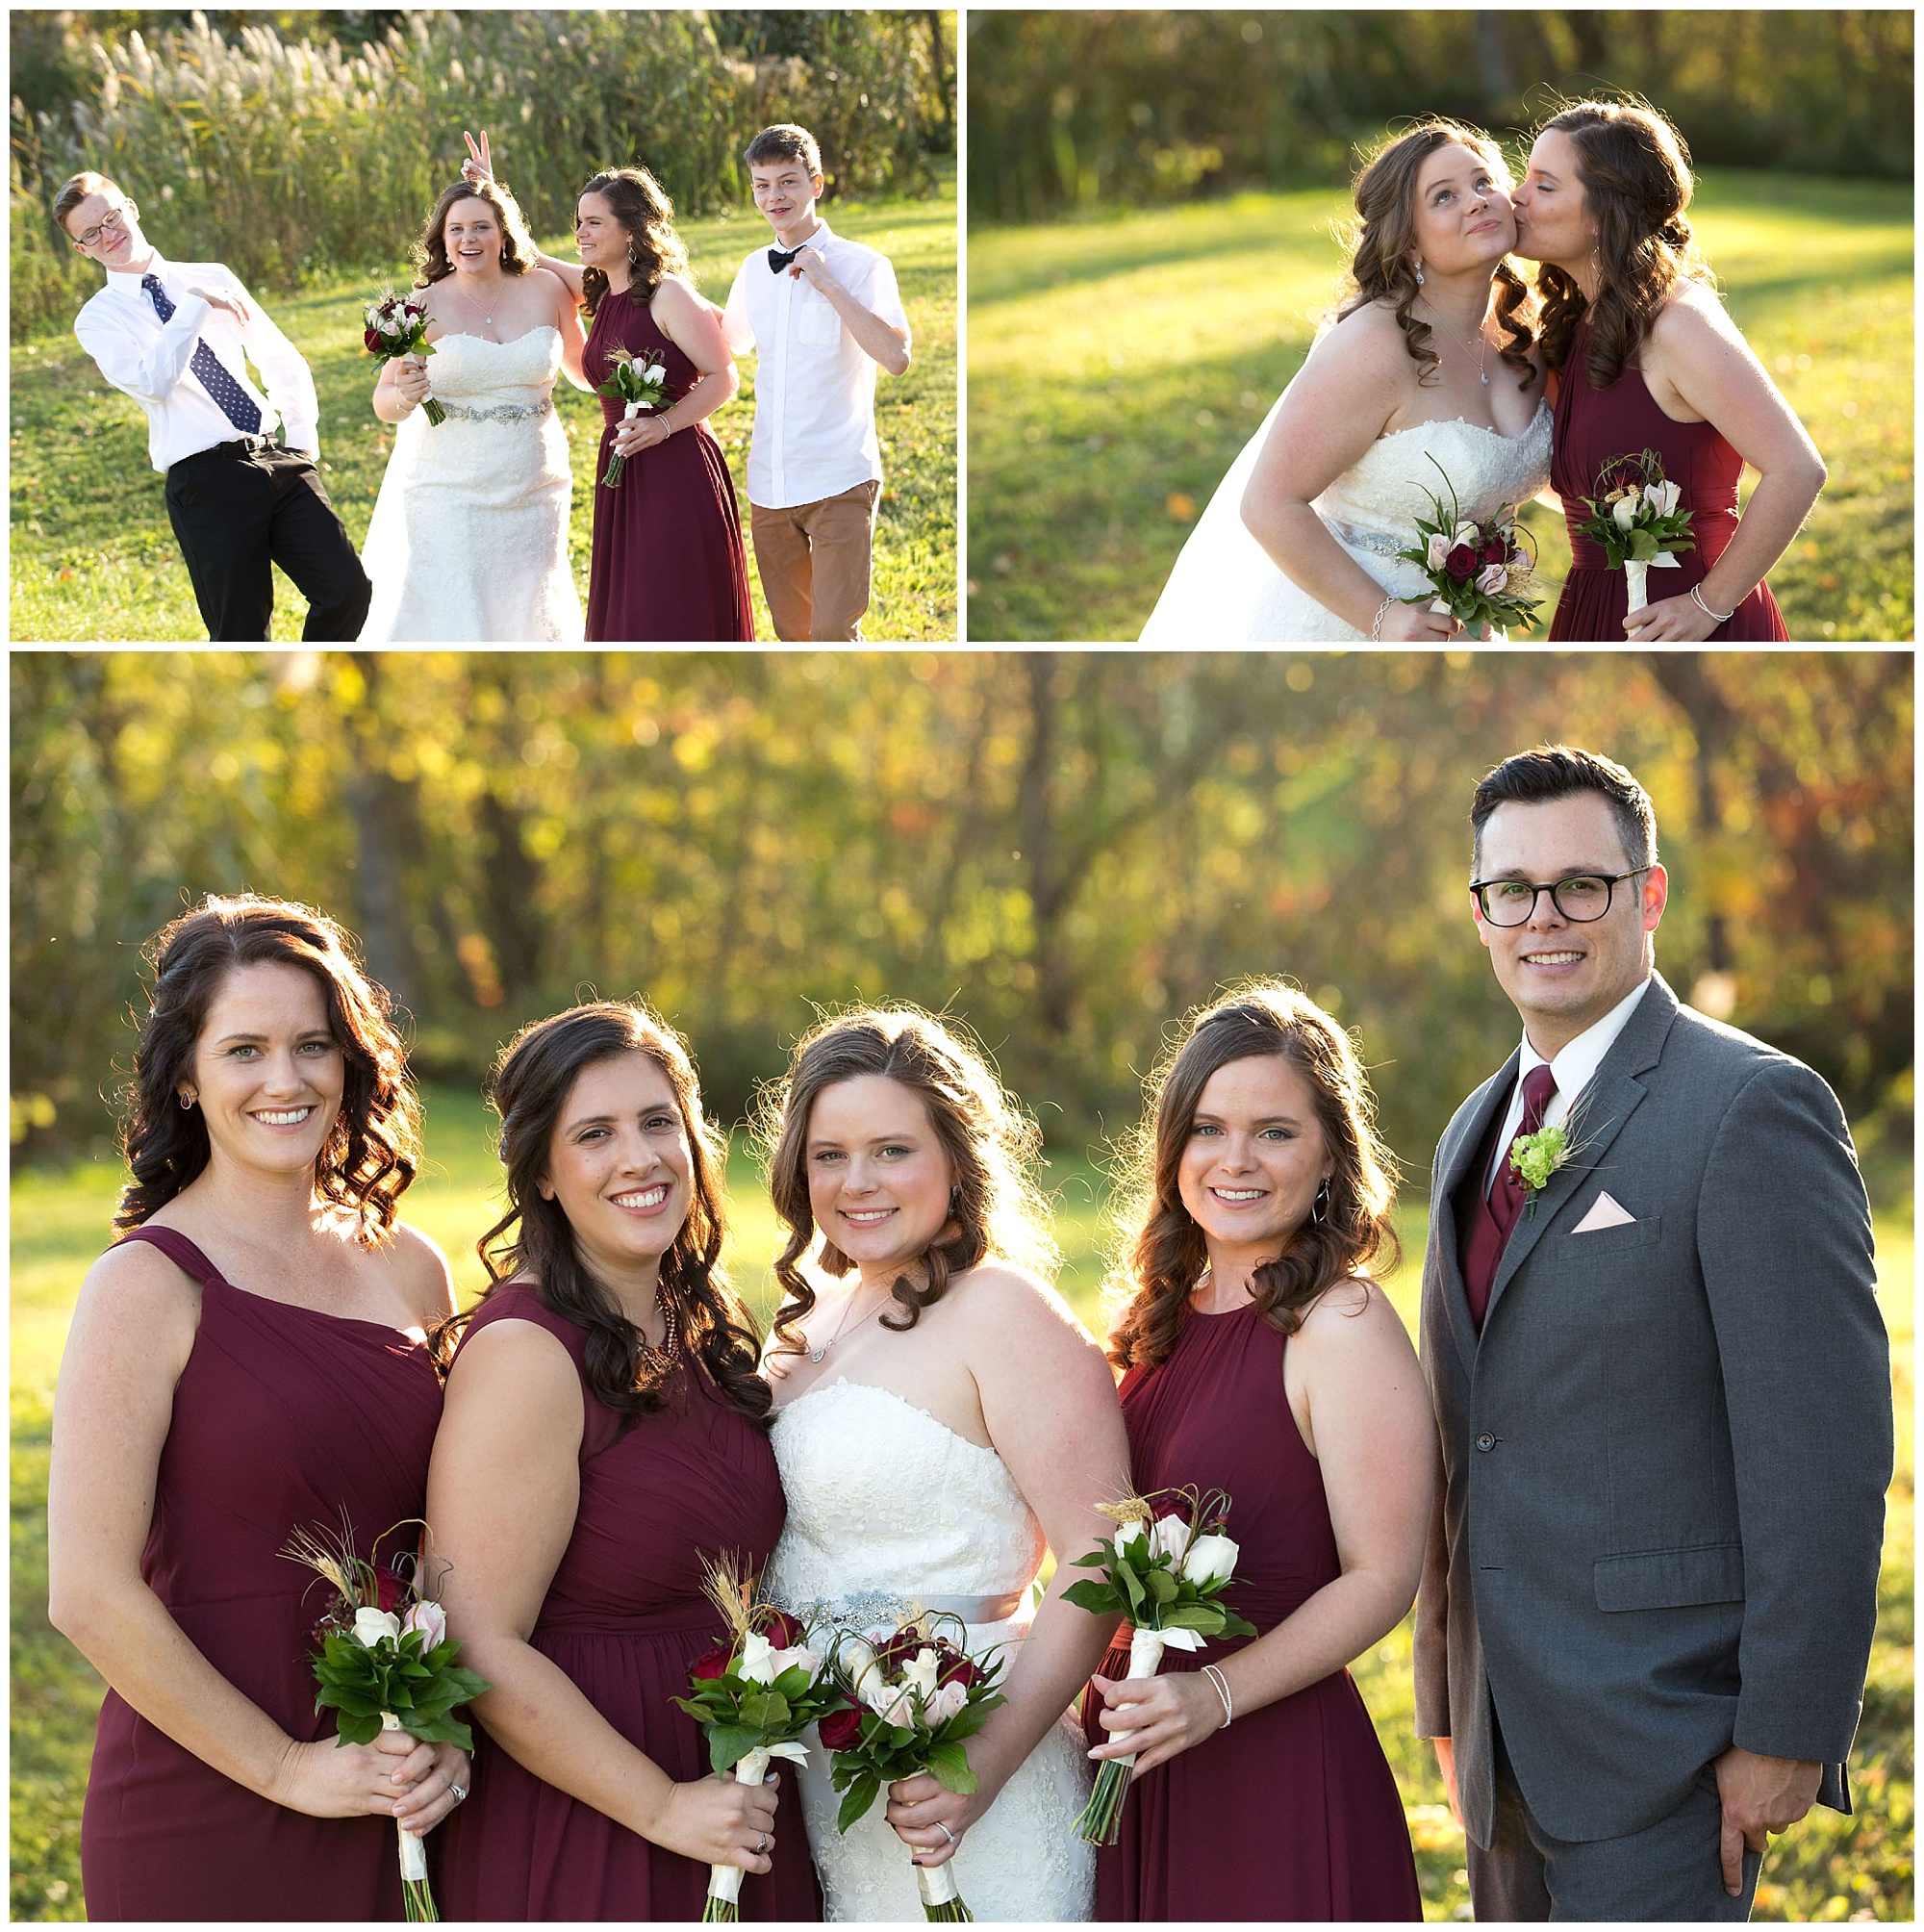 Three separate photos of the bride with her sister, here brothers and of her wedding party.